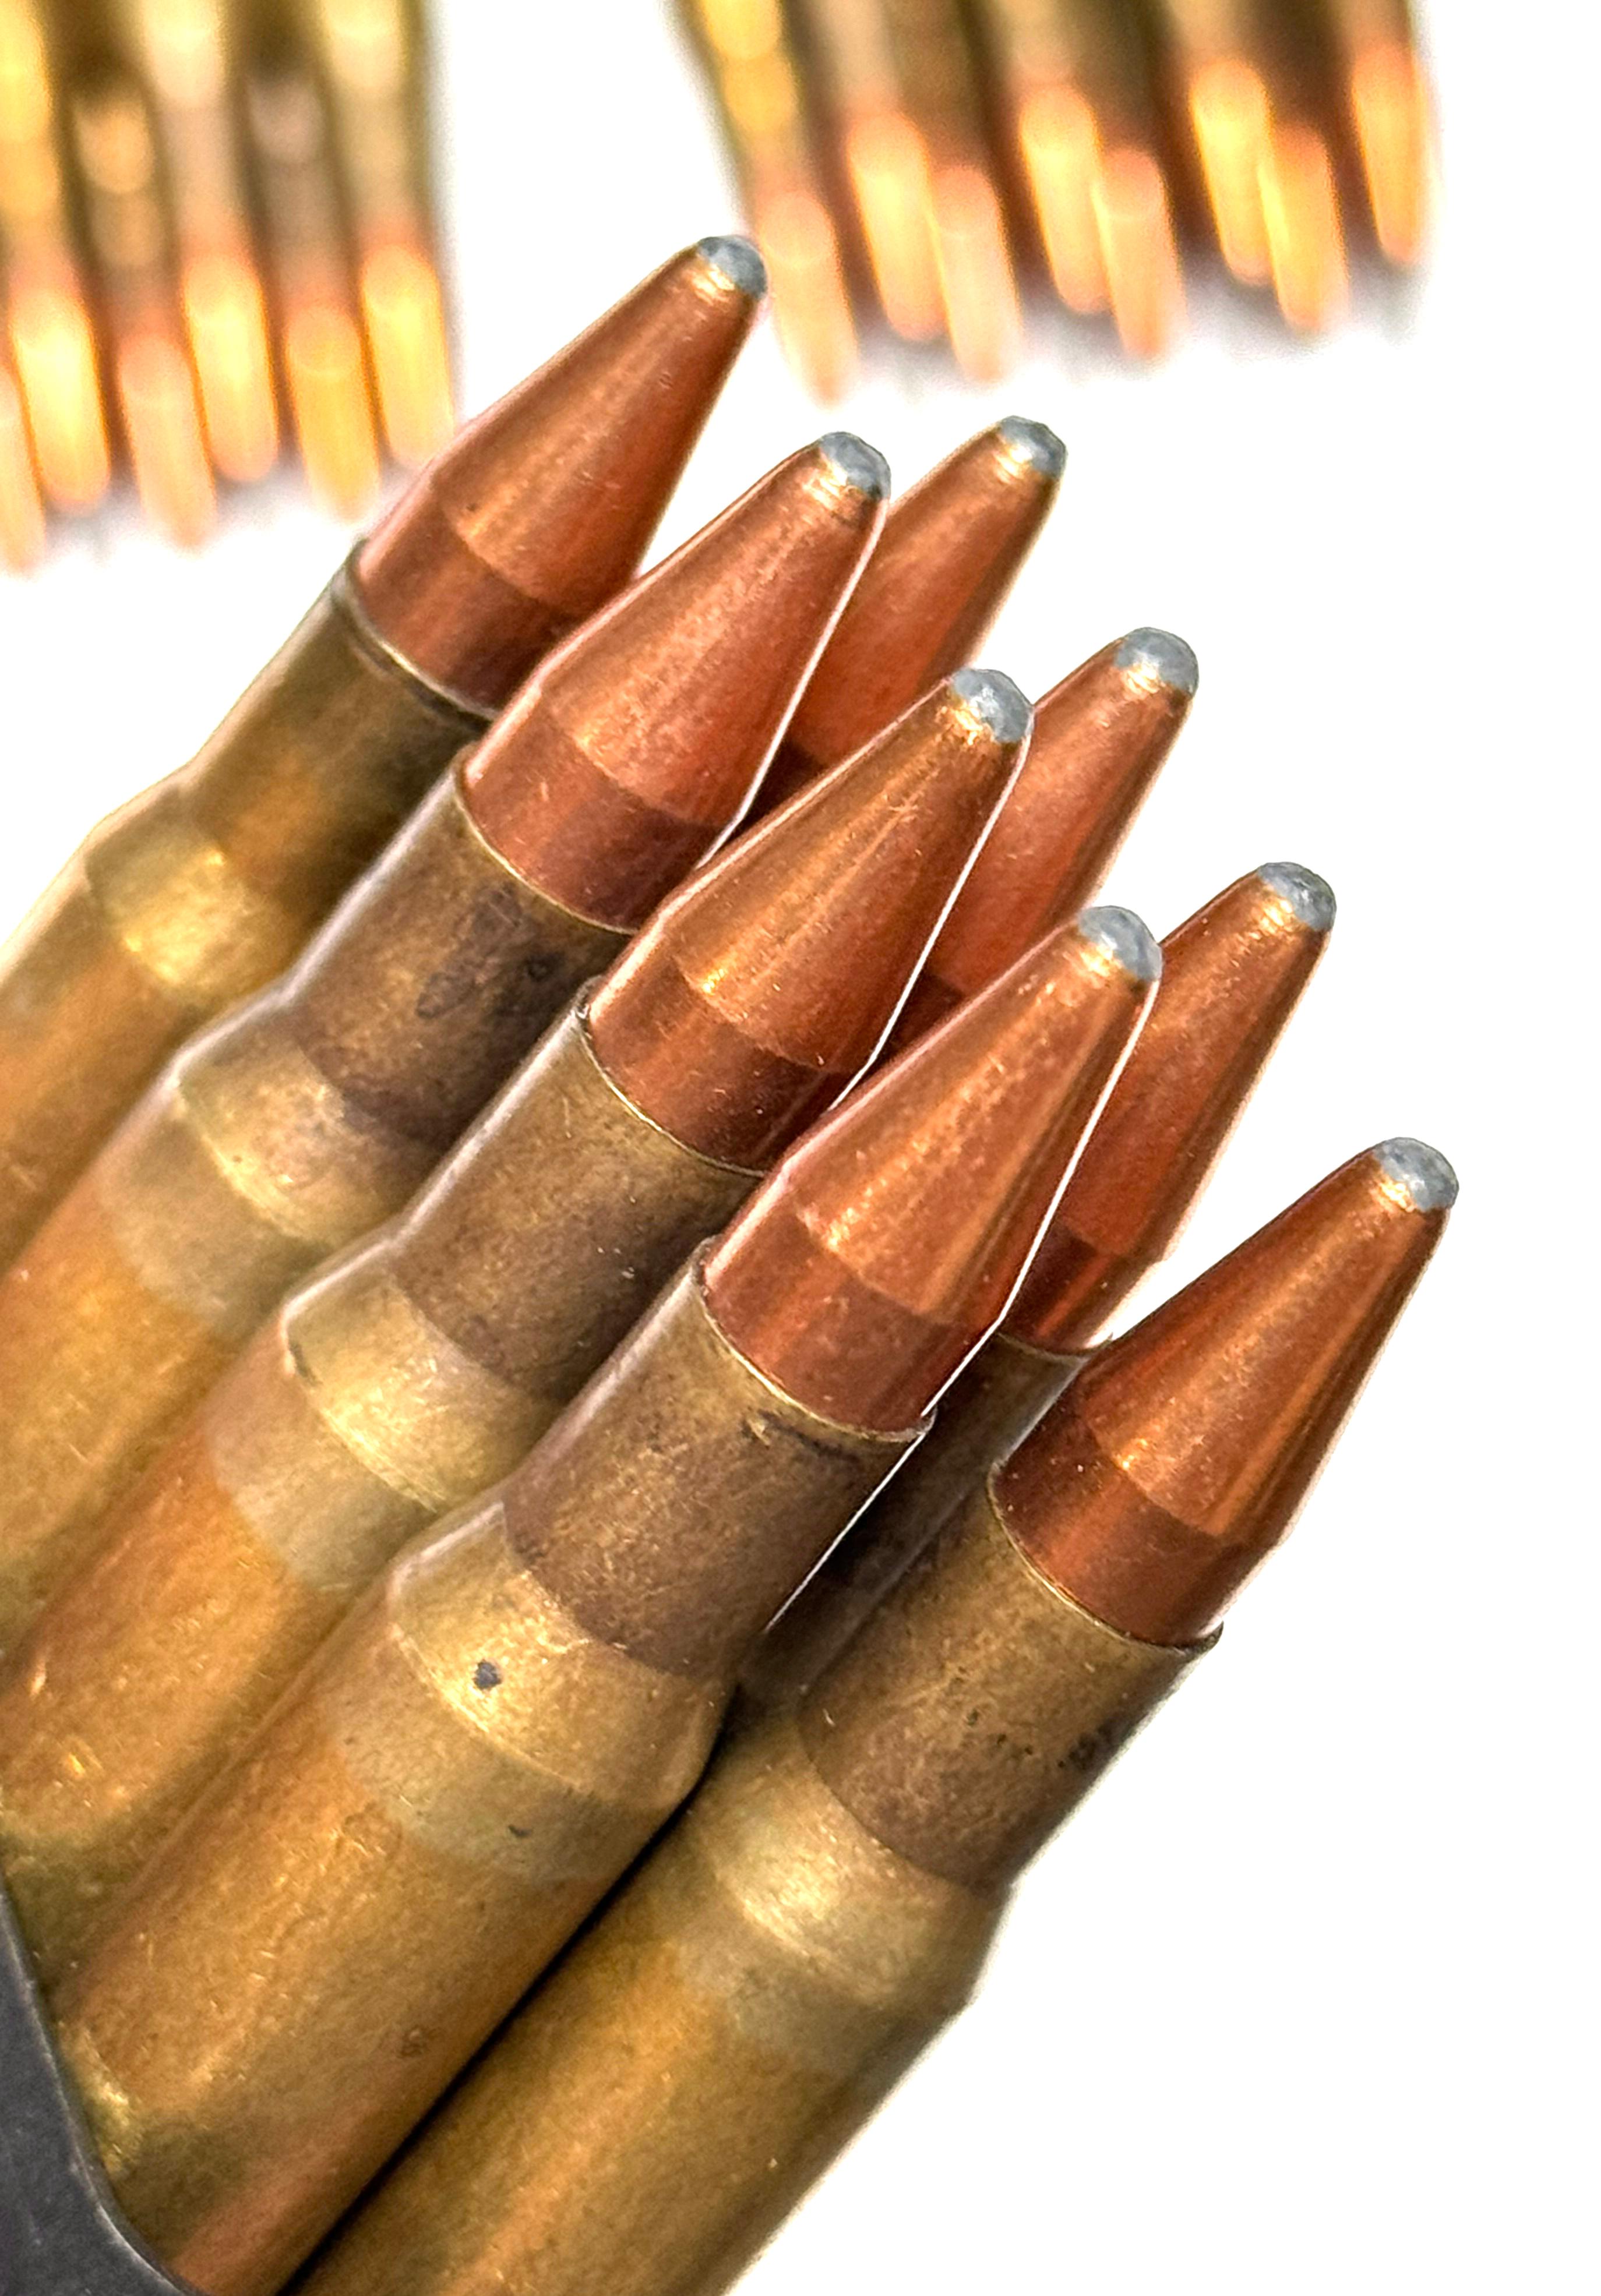 56rds. of Various .30-06 SPRG. Pointed SP Ammunition in Enblock Clips 